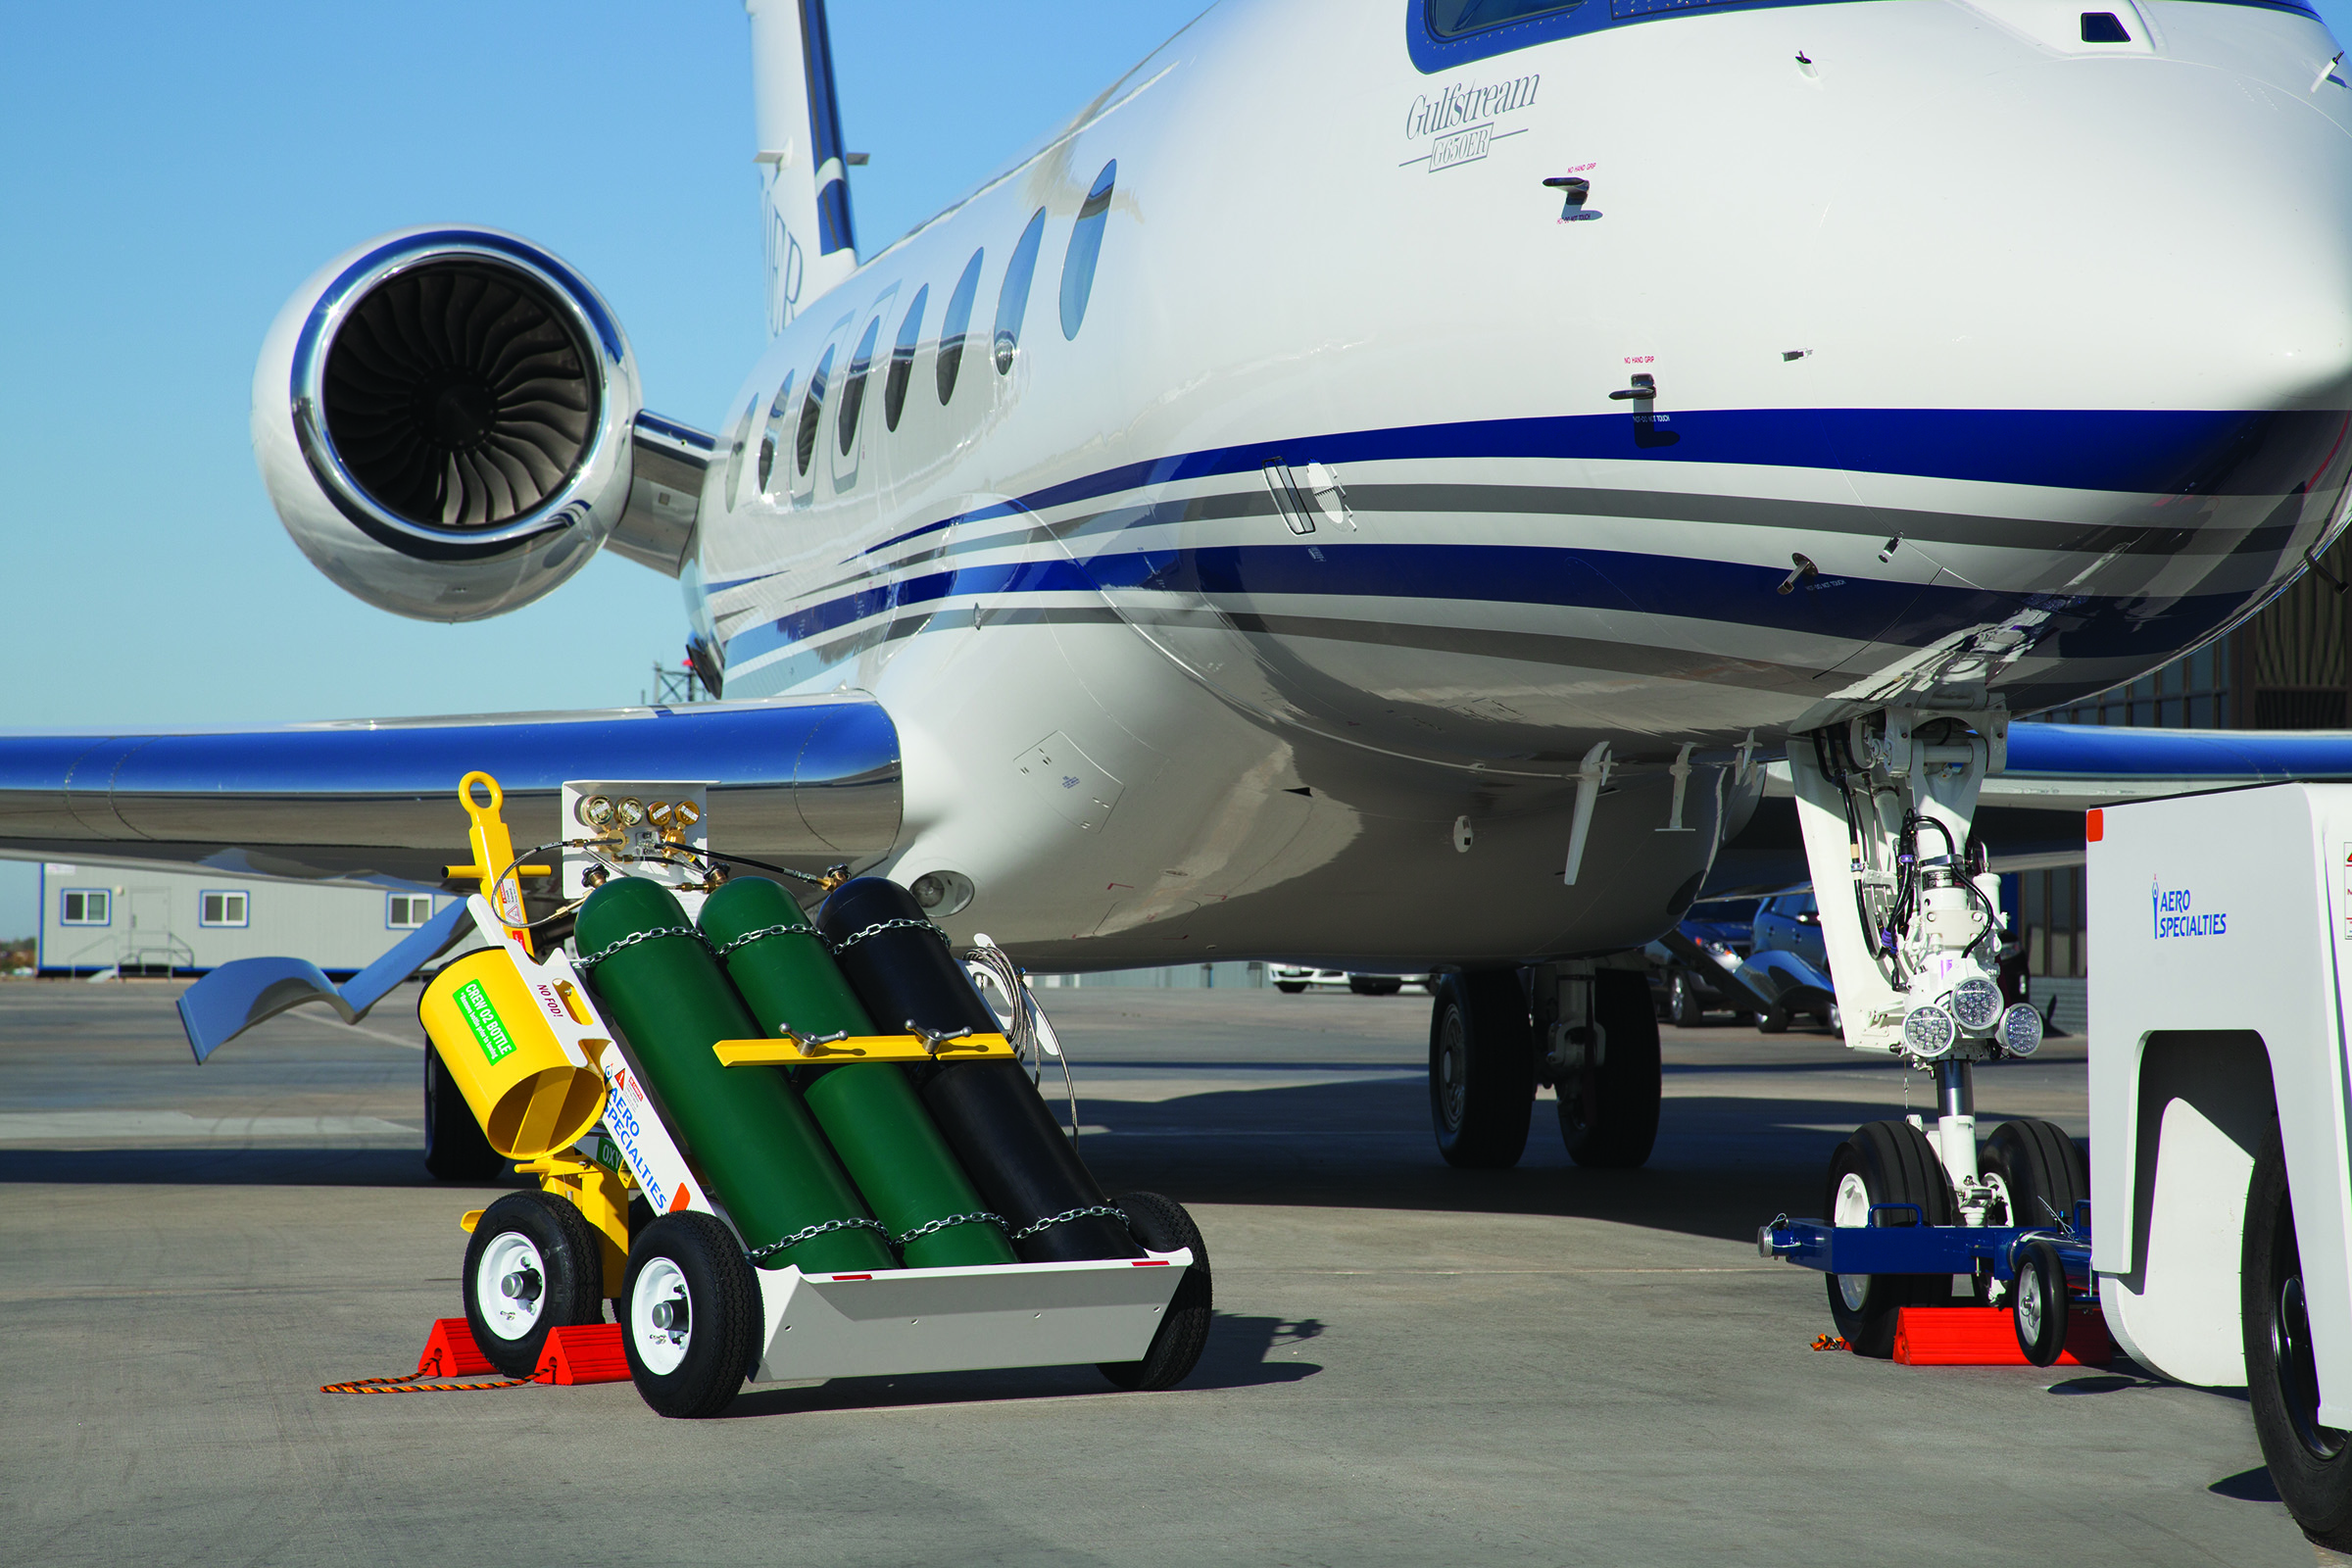 aero bottle oxygen service aircraft specialties cart ground equipment support remote o2 airport aviation gse complete company